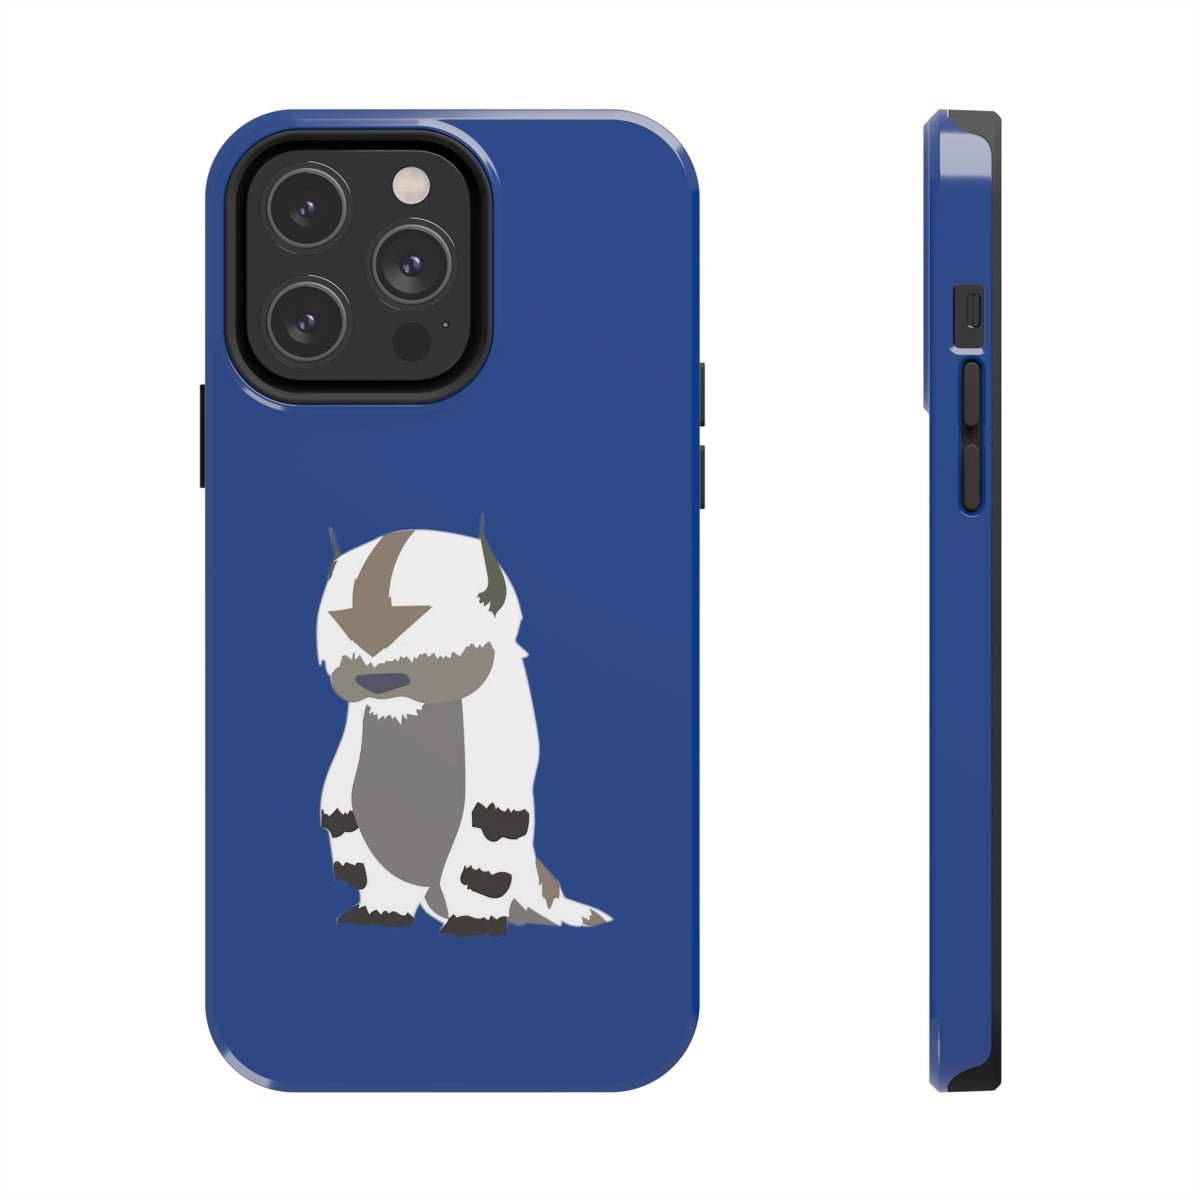 Appa Avatar The Last Airbender Anime iPhone Case (Series 12, 13, 14) - One Punch Fits